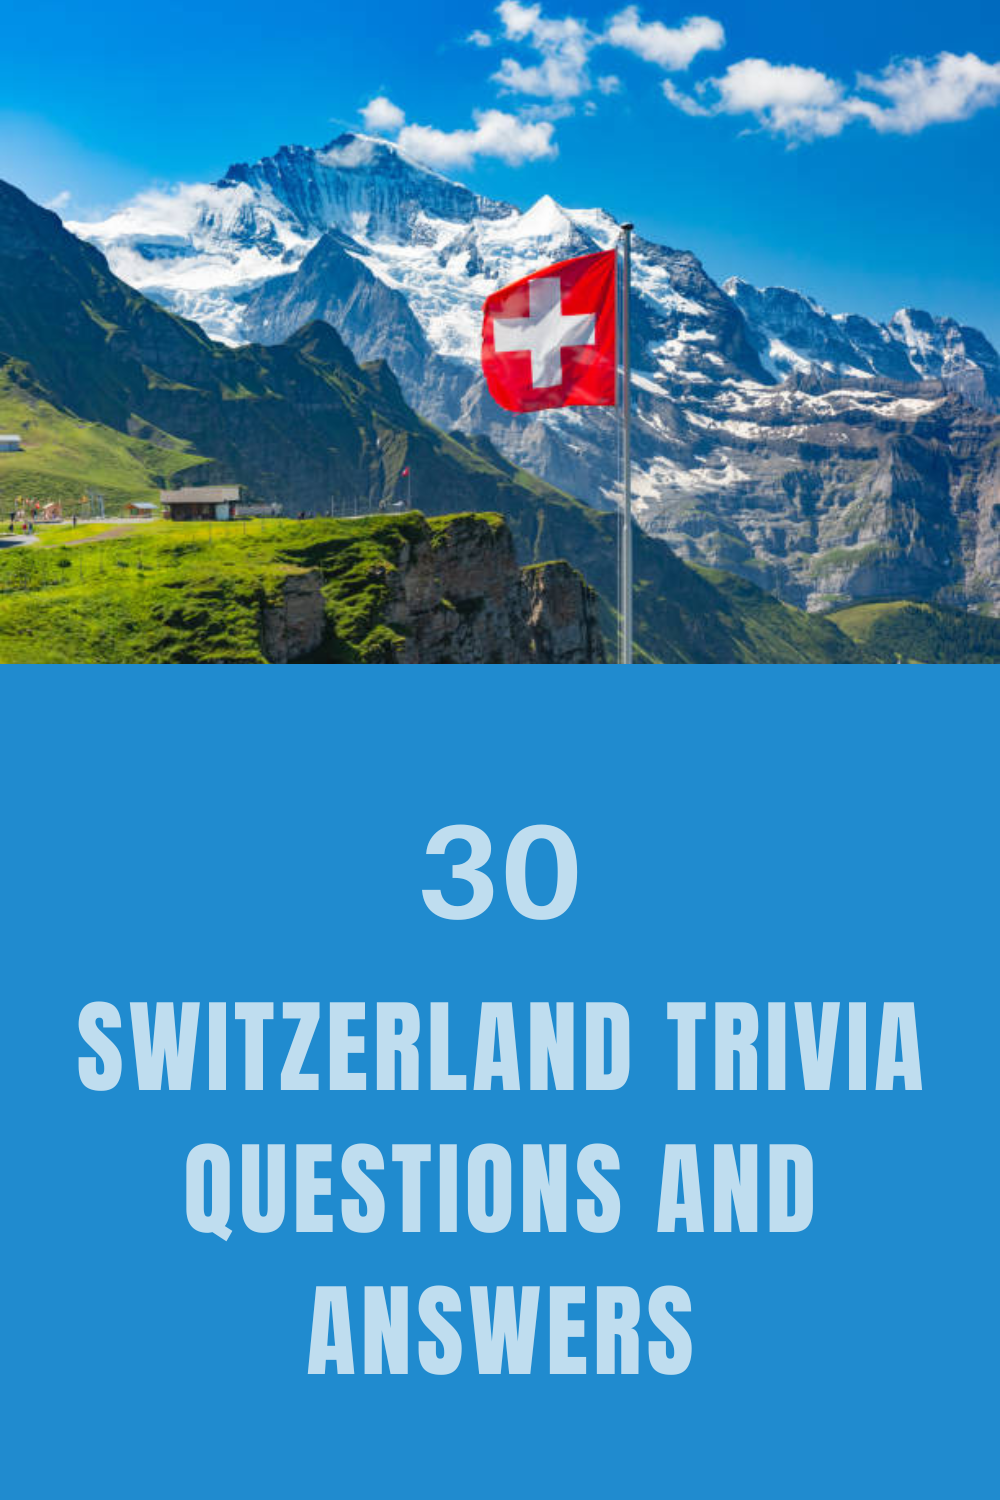 30 Switzerland Trivia Questions and Answers